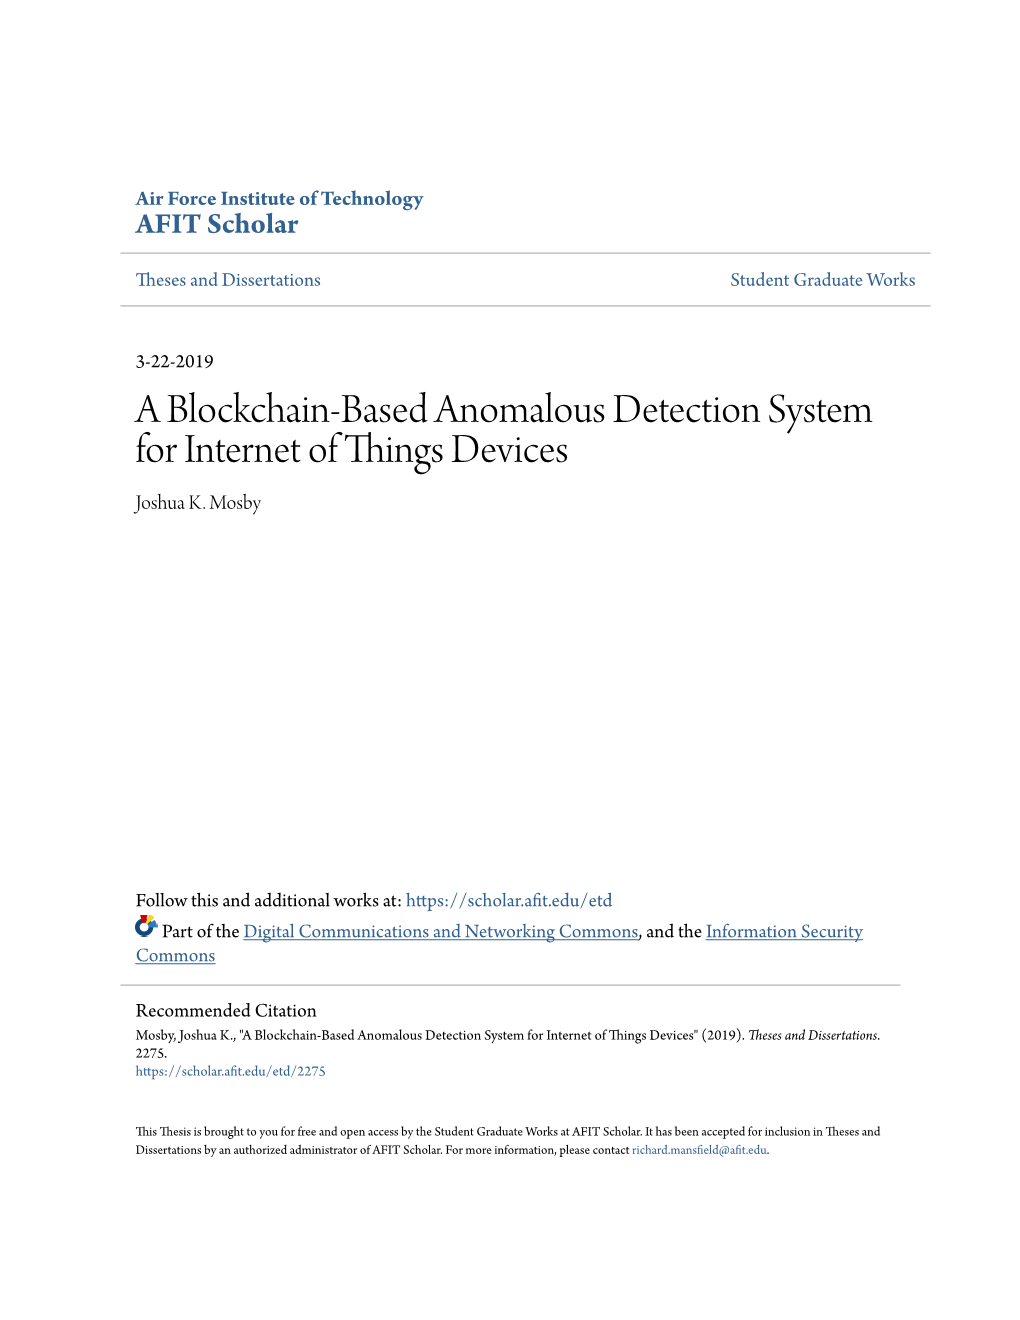 A Blockchain-Based Anomalous Detection System for Internet of Things Devices Joshua K